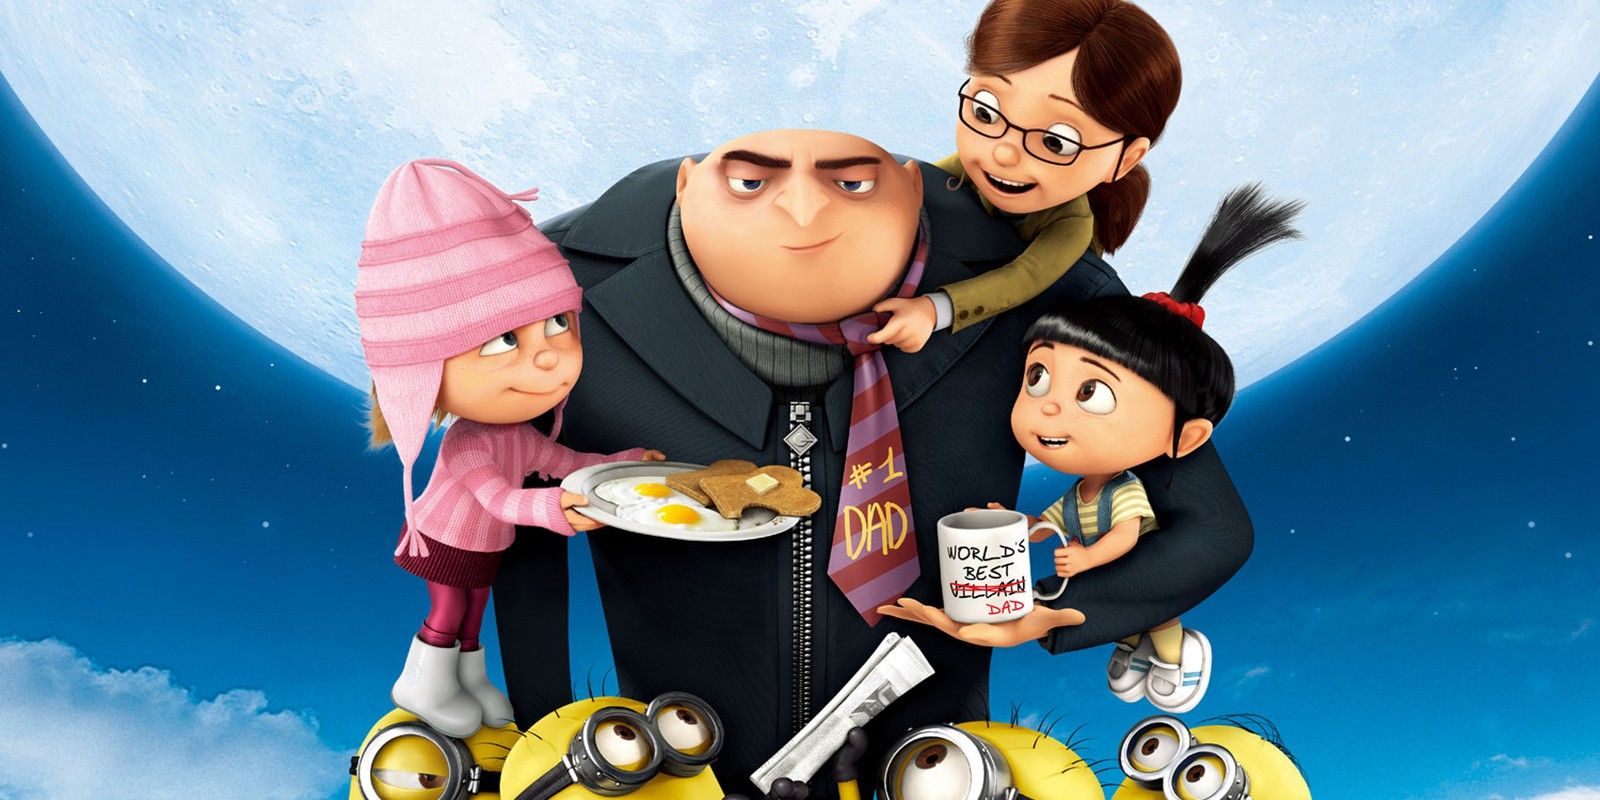 Gru and his Daughters pose together in Despicable Me